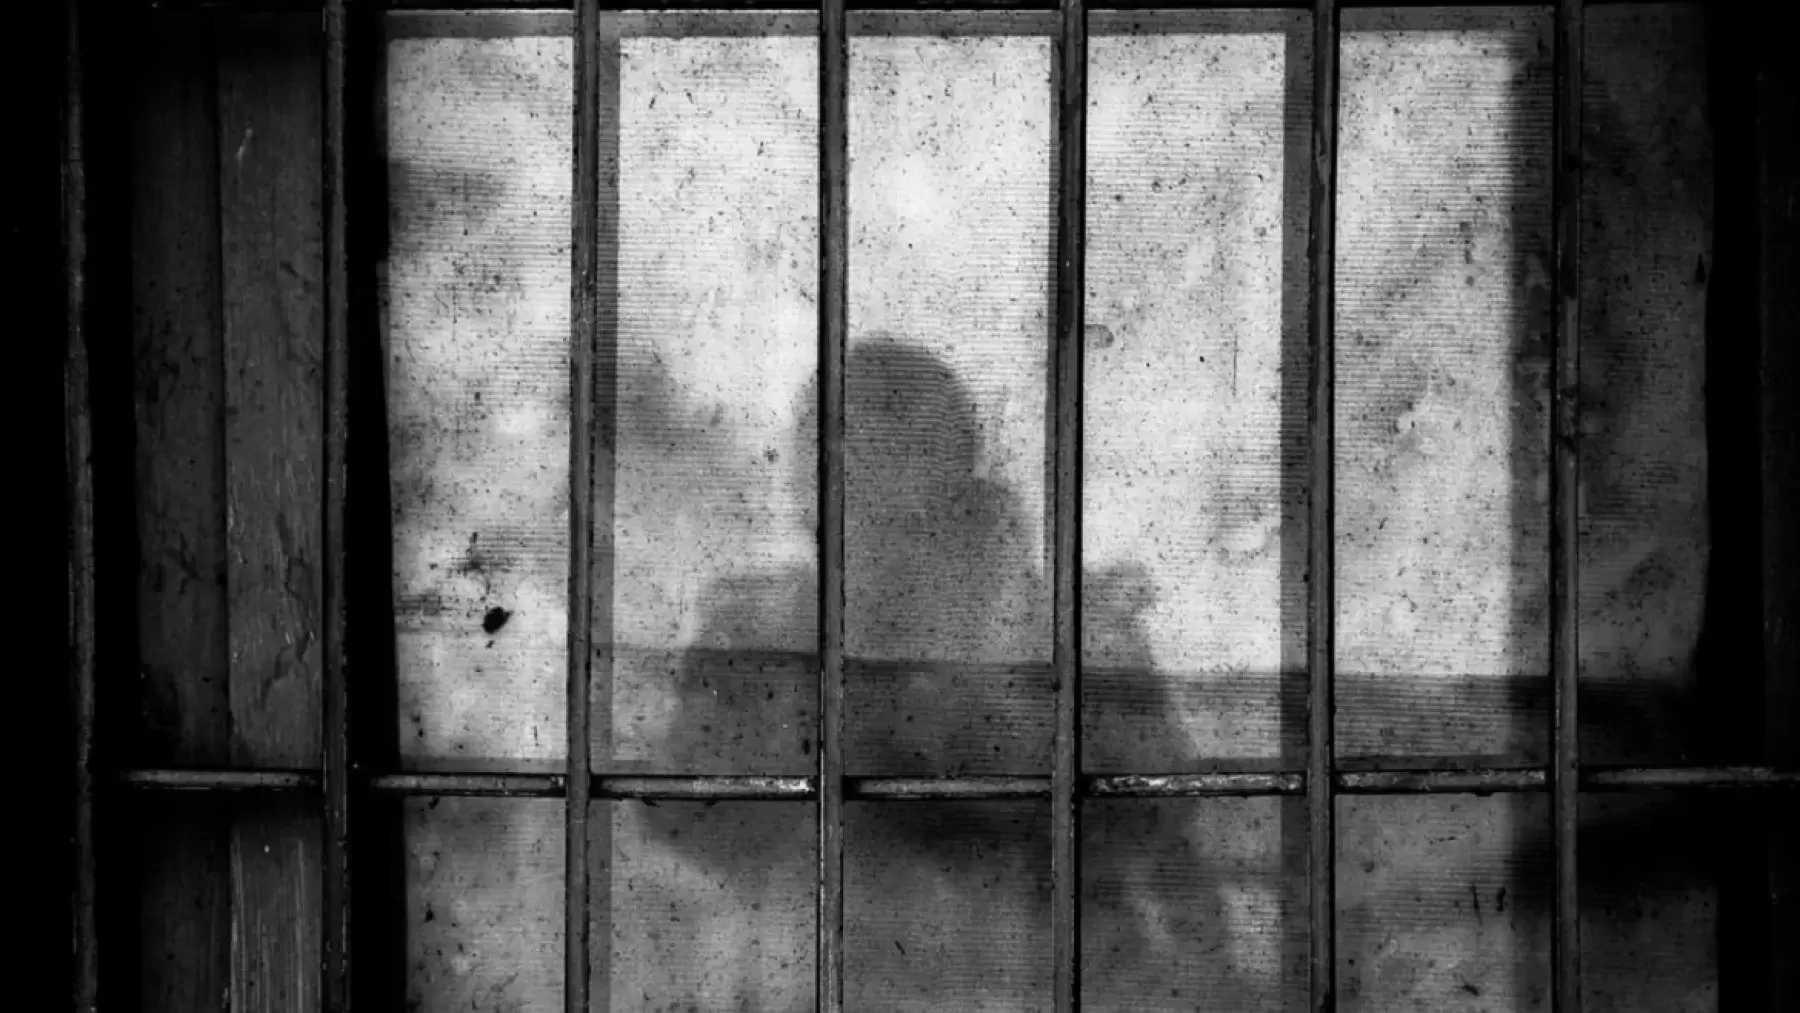 Image description: grey and black stock photo of bars on a window. A person's shadow is in the center of the window